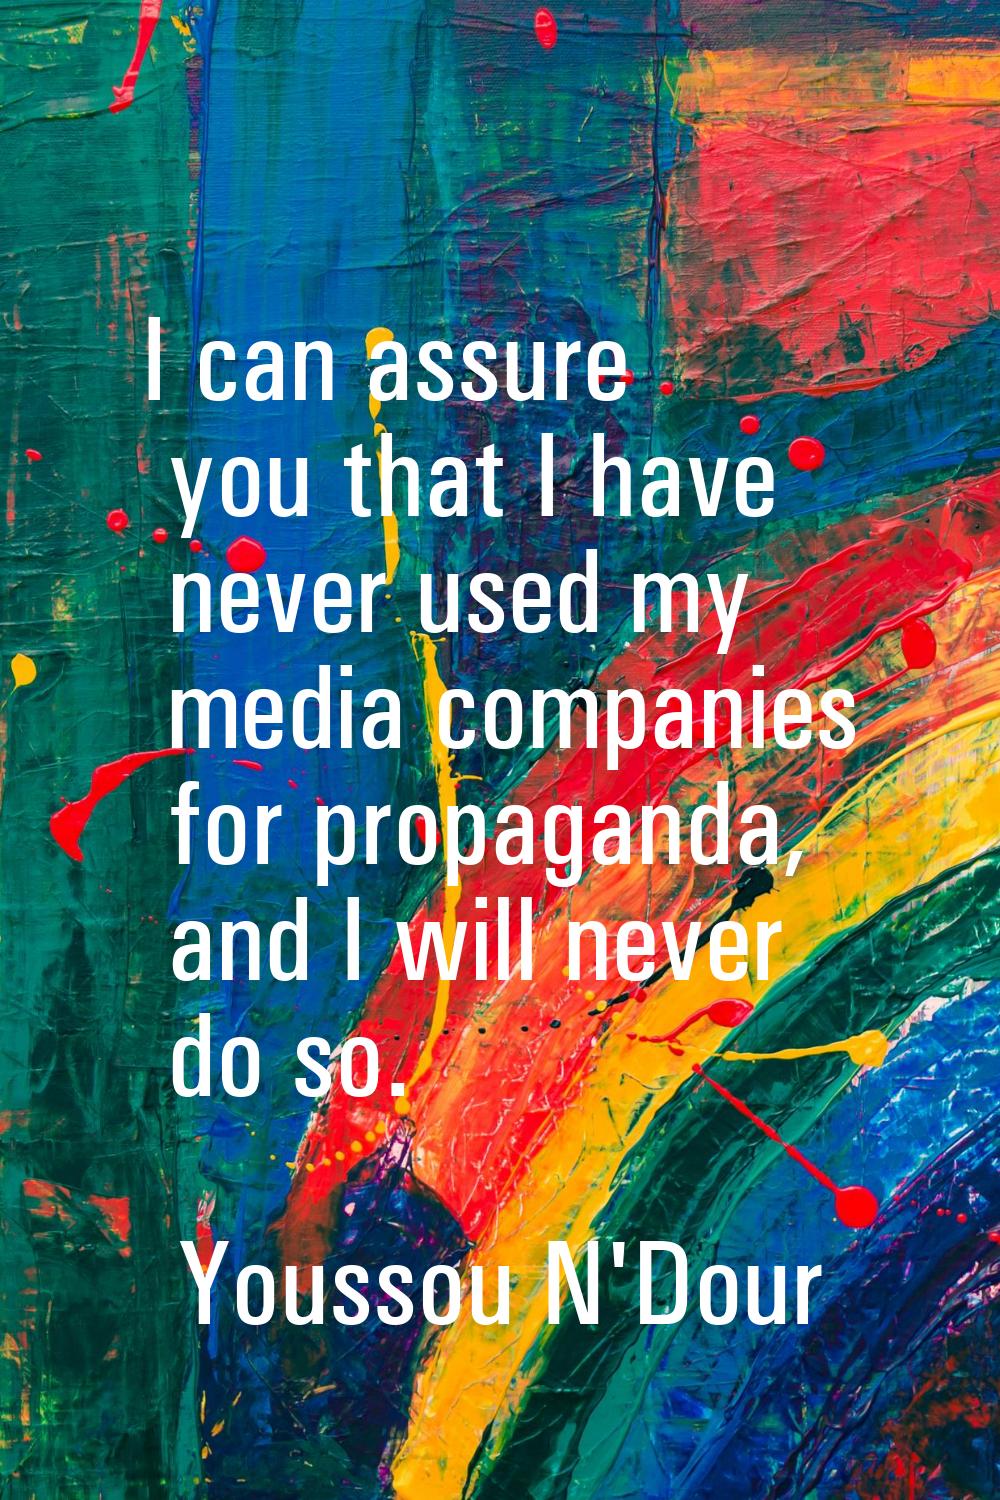 I can assure you that I have never used my media companies for propaganda, and I will never do so.